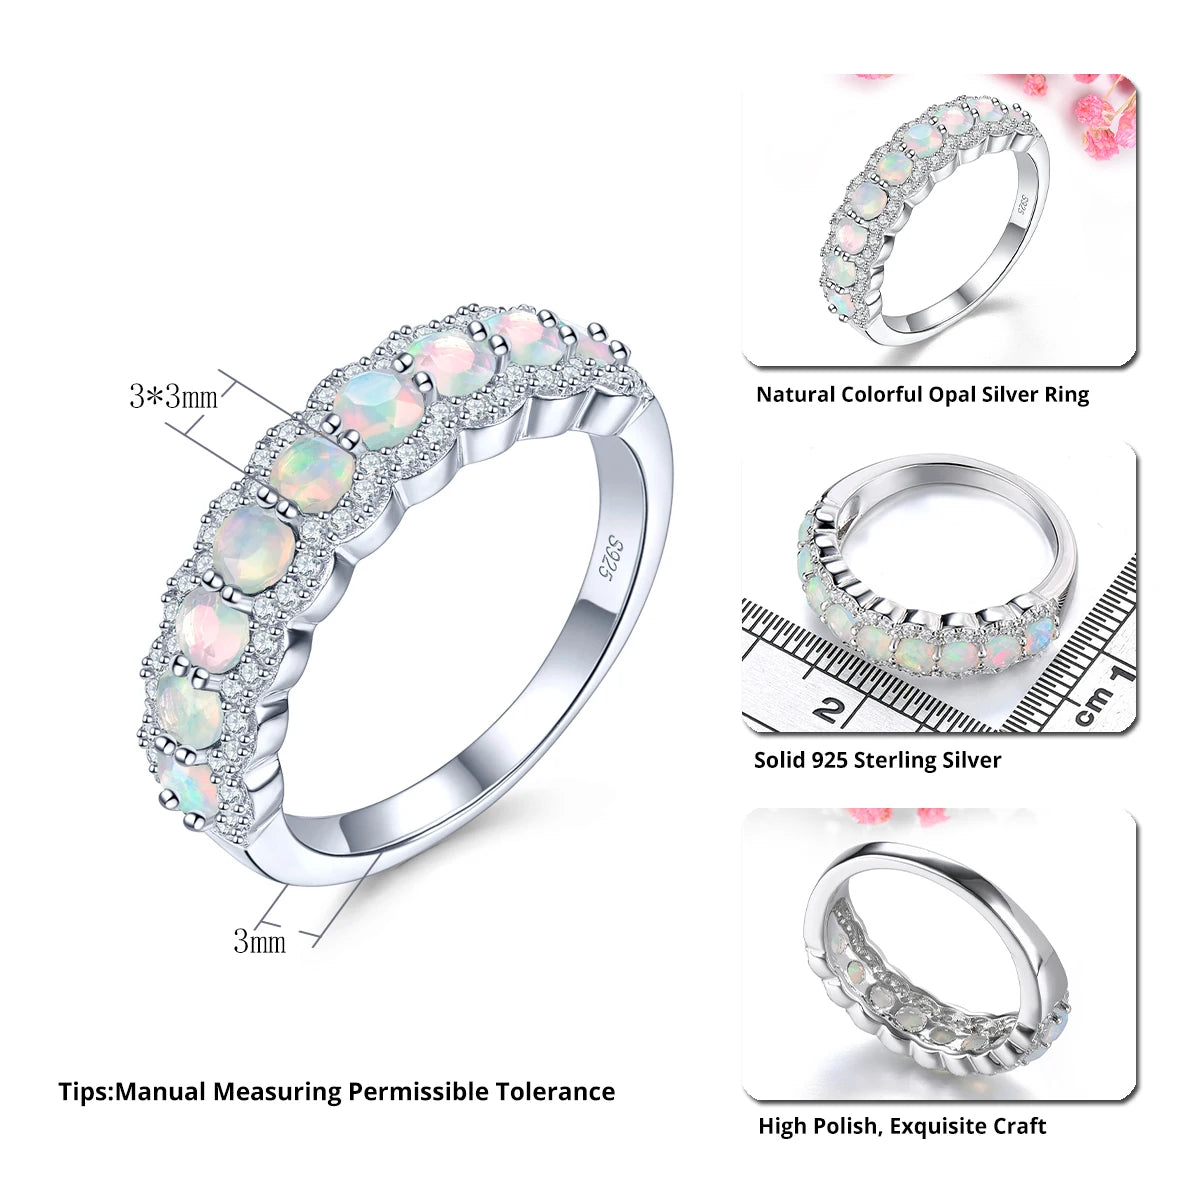 Natural White Opal Sterling Silver Women's Rings 0.6 Carats Genuine Faced Opal Classic Fine Jewelry Design S925 Birthday Gifts